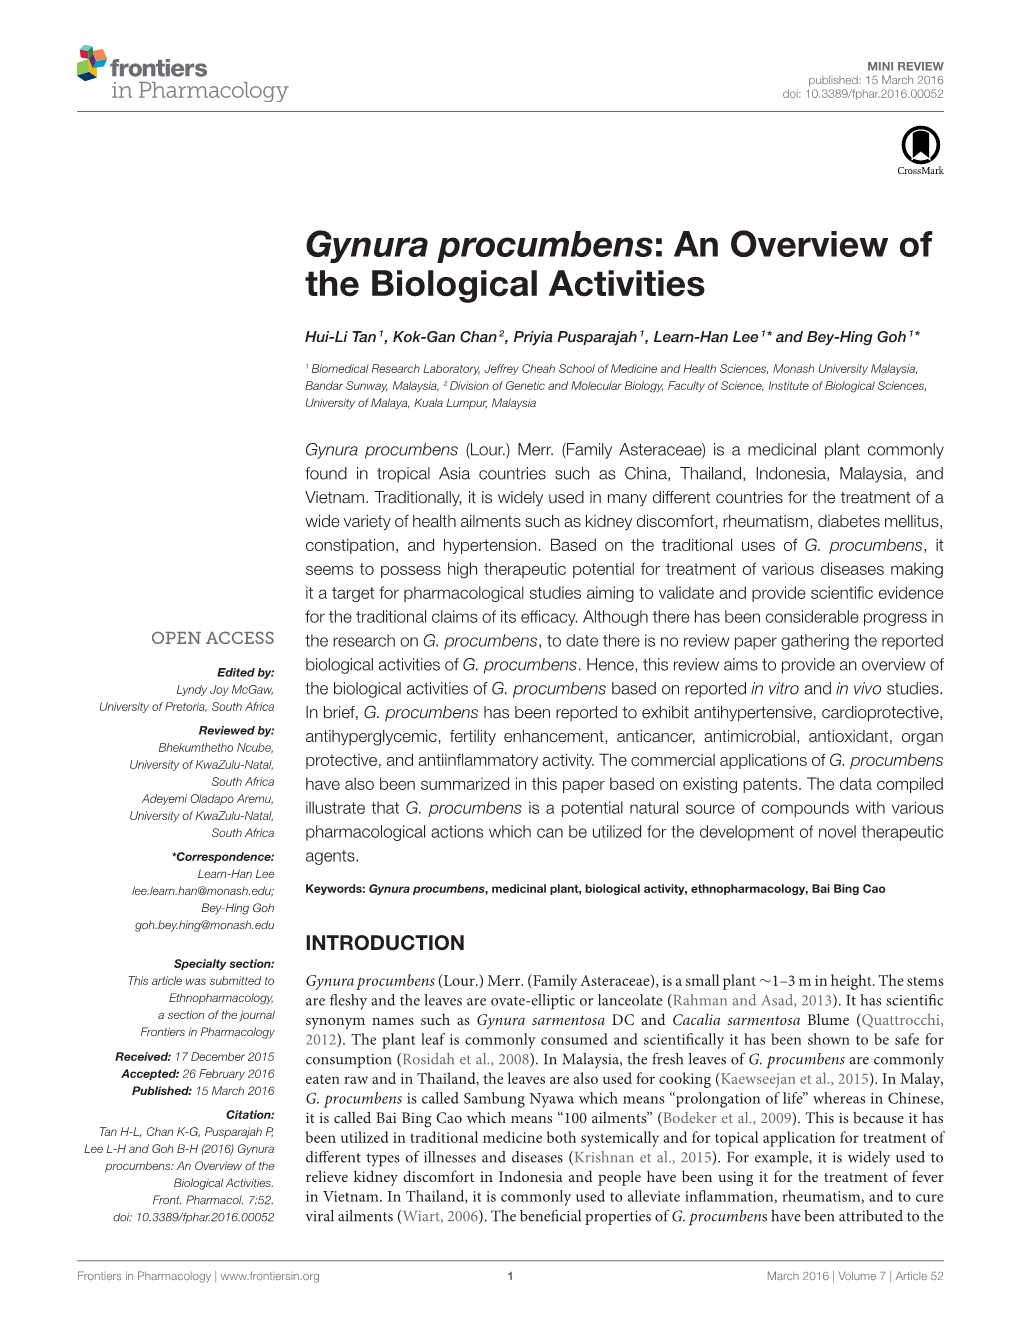 Gynura Procumbens: an Overview of the Biological Activities